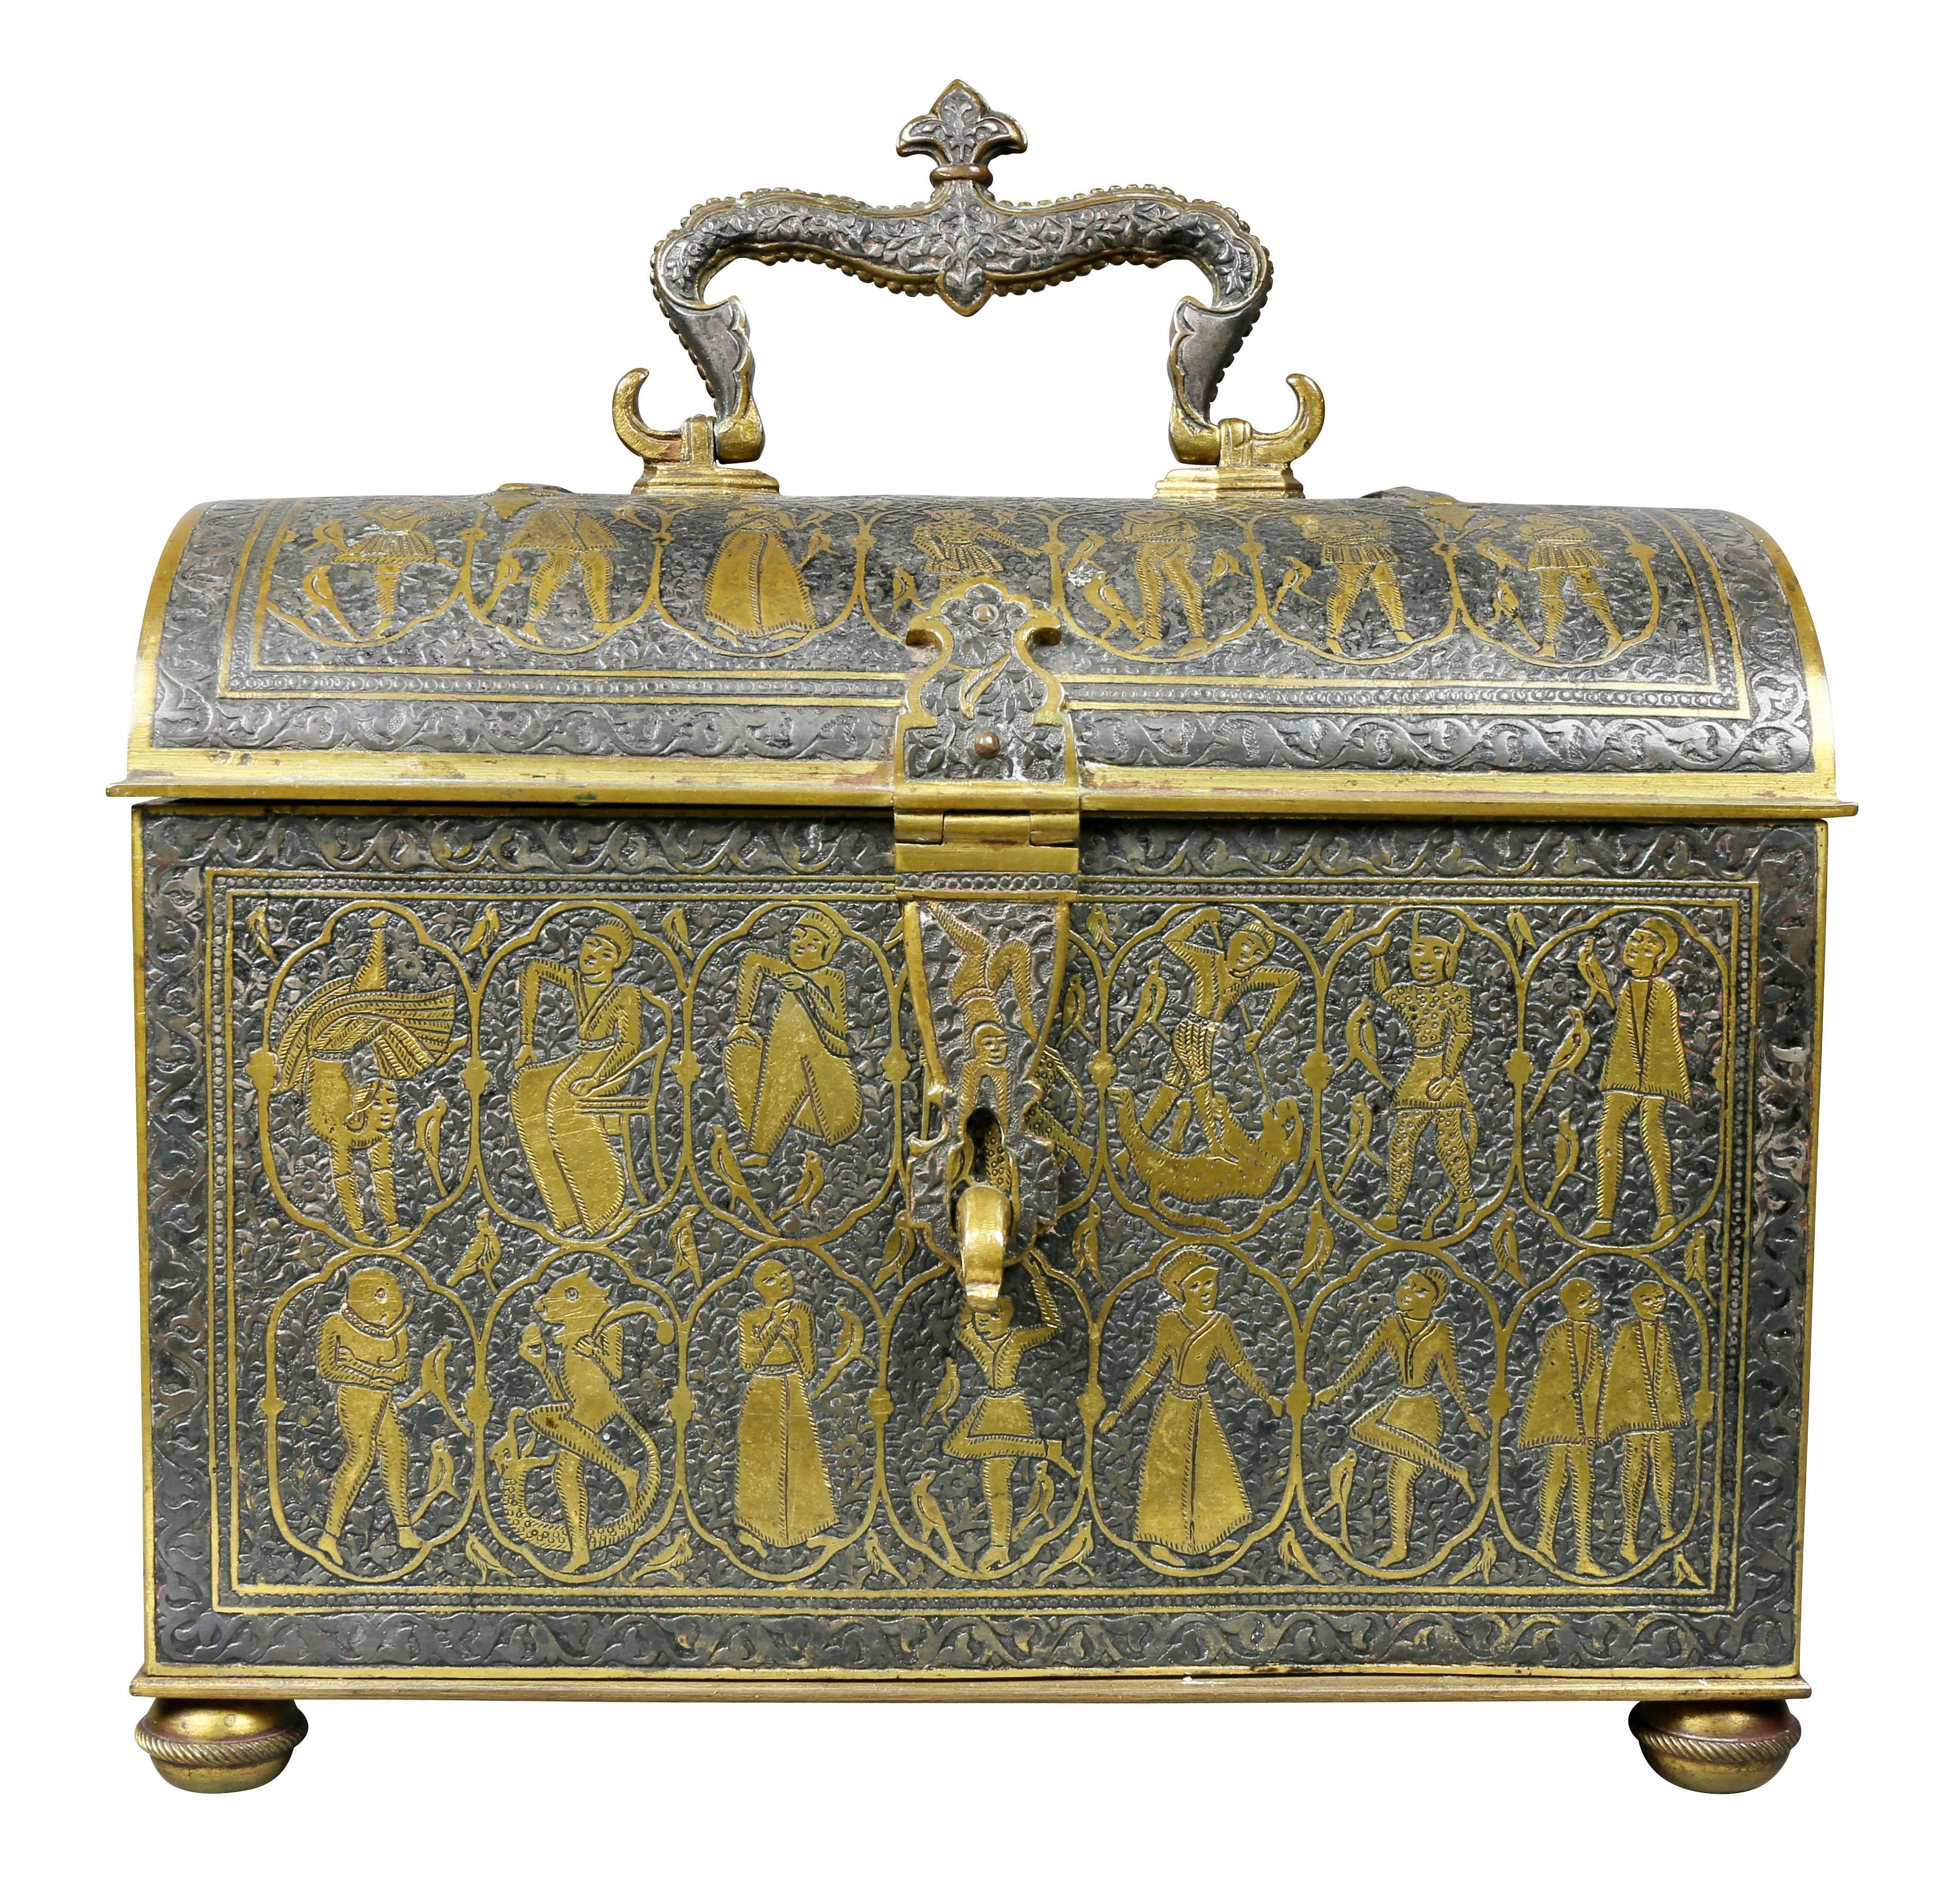 With a domed hinged lid and bail handle over a conforming case decorated overall with figures in Renaissance dress. Bun feet. Provenance; David and Peggy Rockefeller estate.